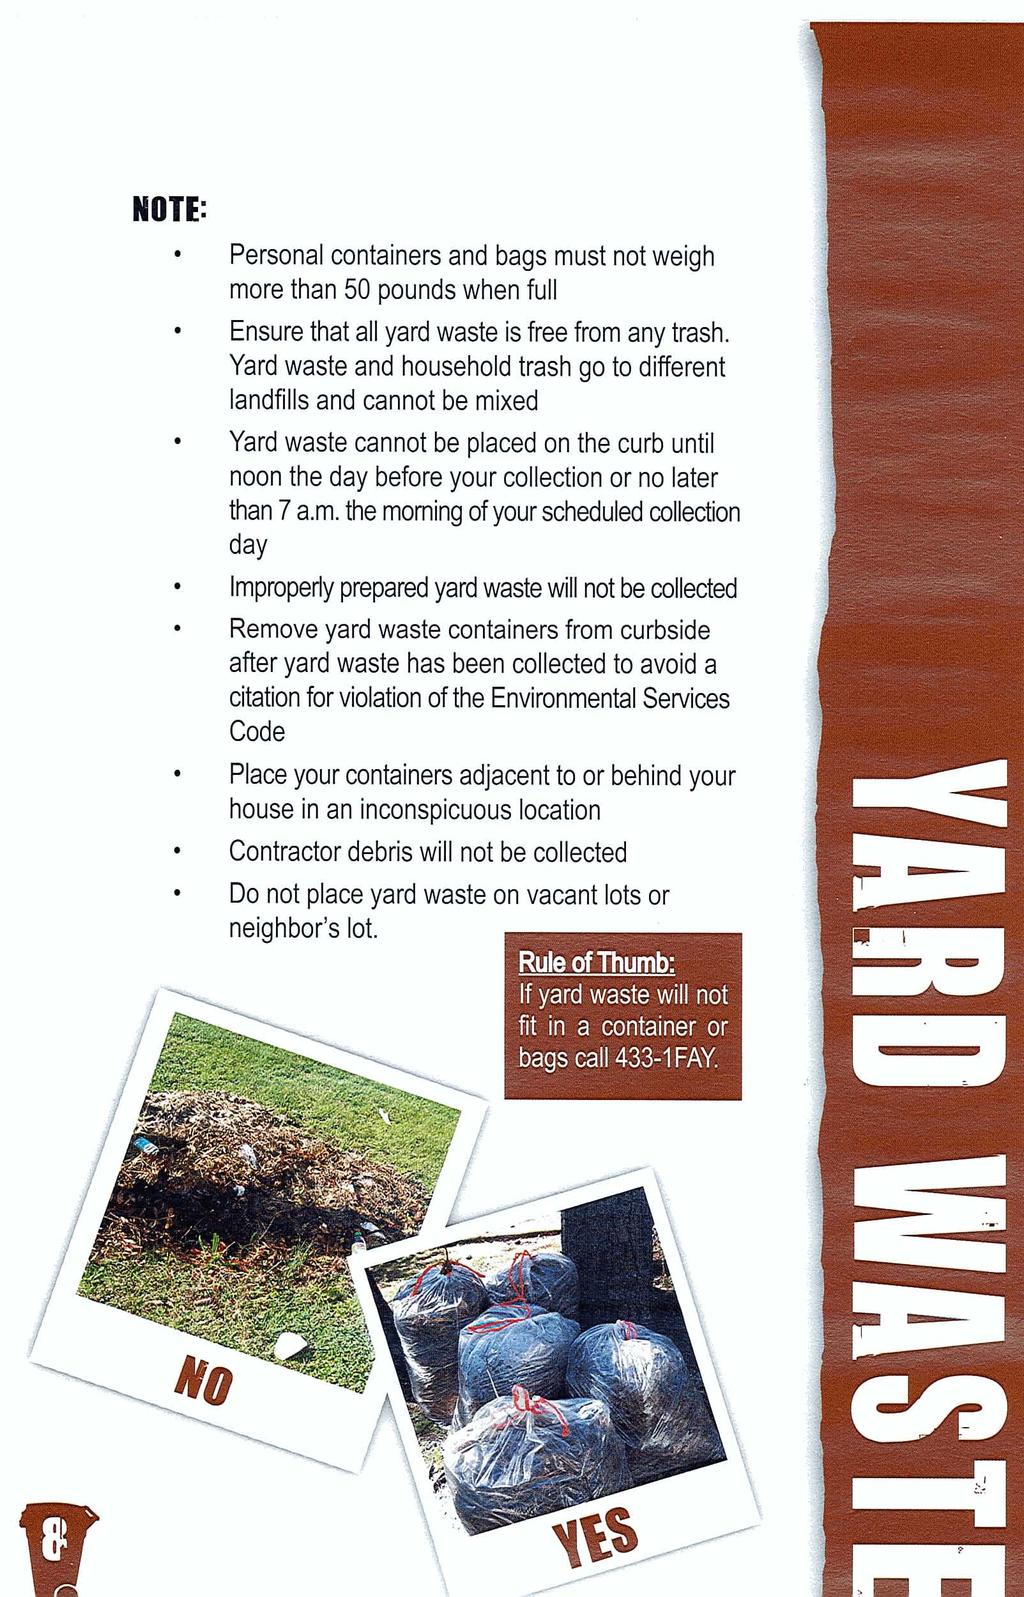 NOTE:. Personal containers and bags must not weigh more than 50 pounds when full Ensure that all yard waste is free from any trash.